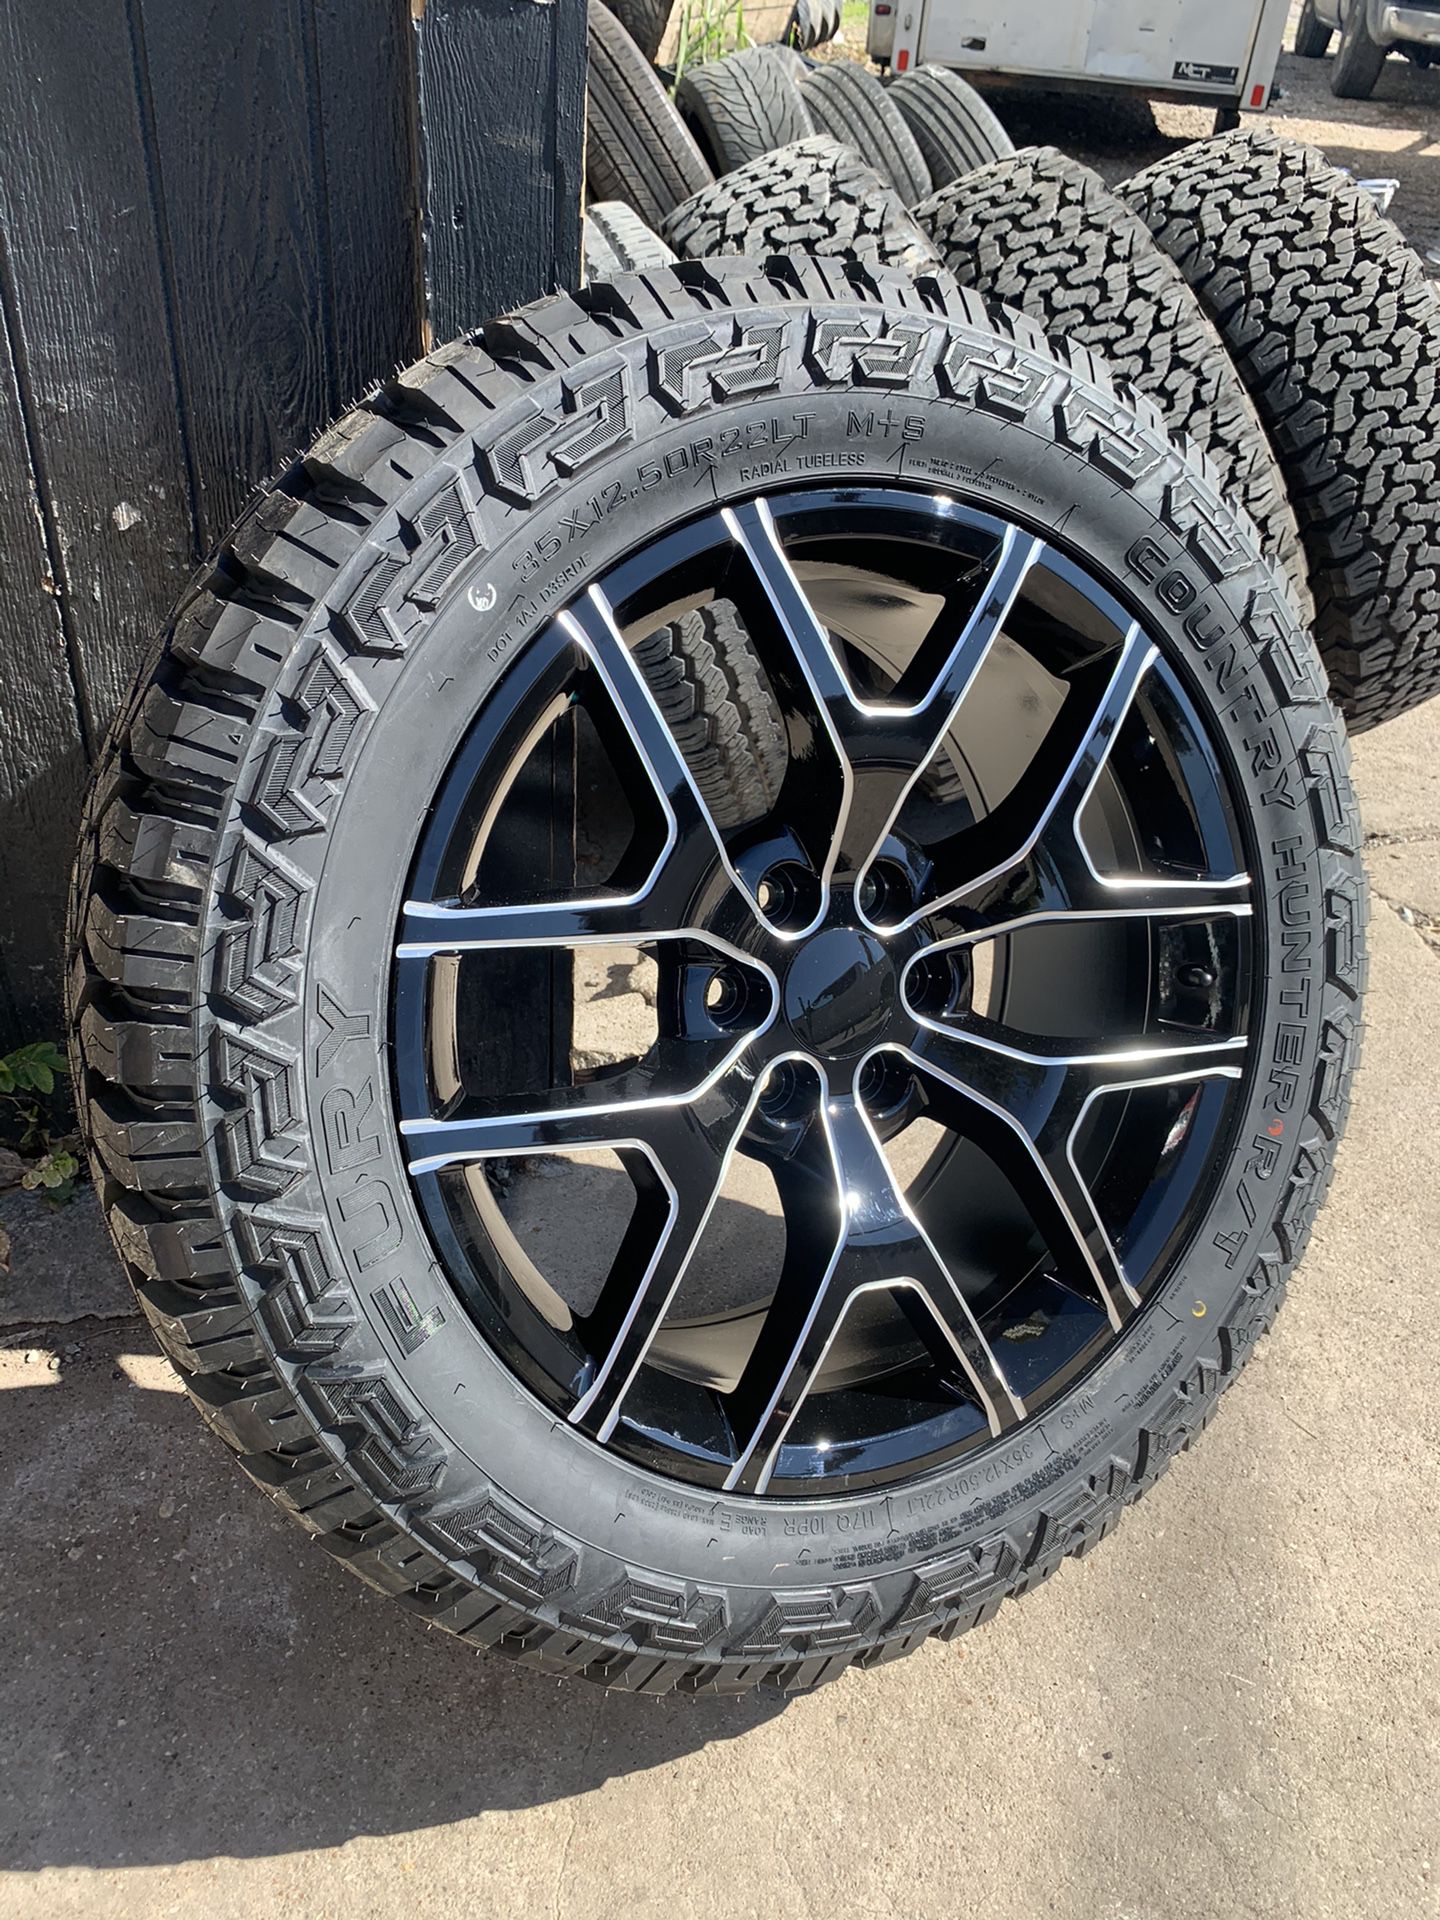 New Complete Set Of 22” Black Chevy / GMC Rims And New Tires 22 Chevrolet Replica Replicas Wheels 22s Rines y Llantas Take offs off takeoffs pull p